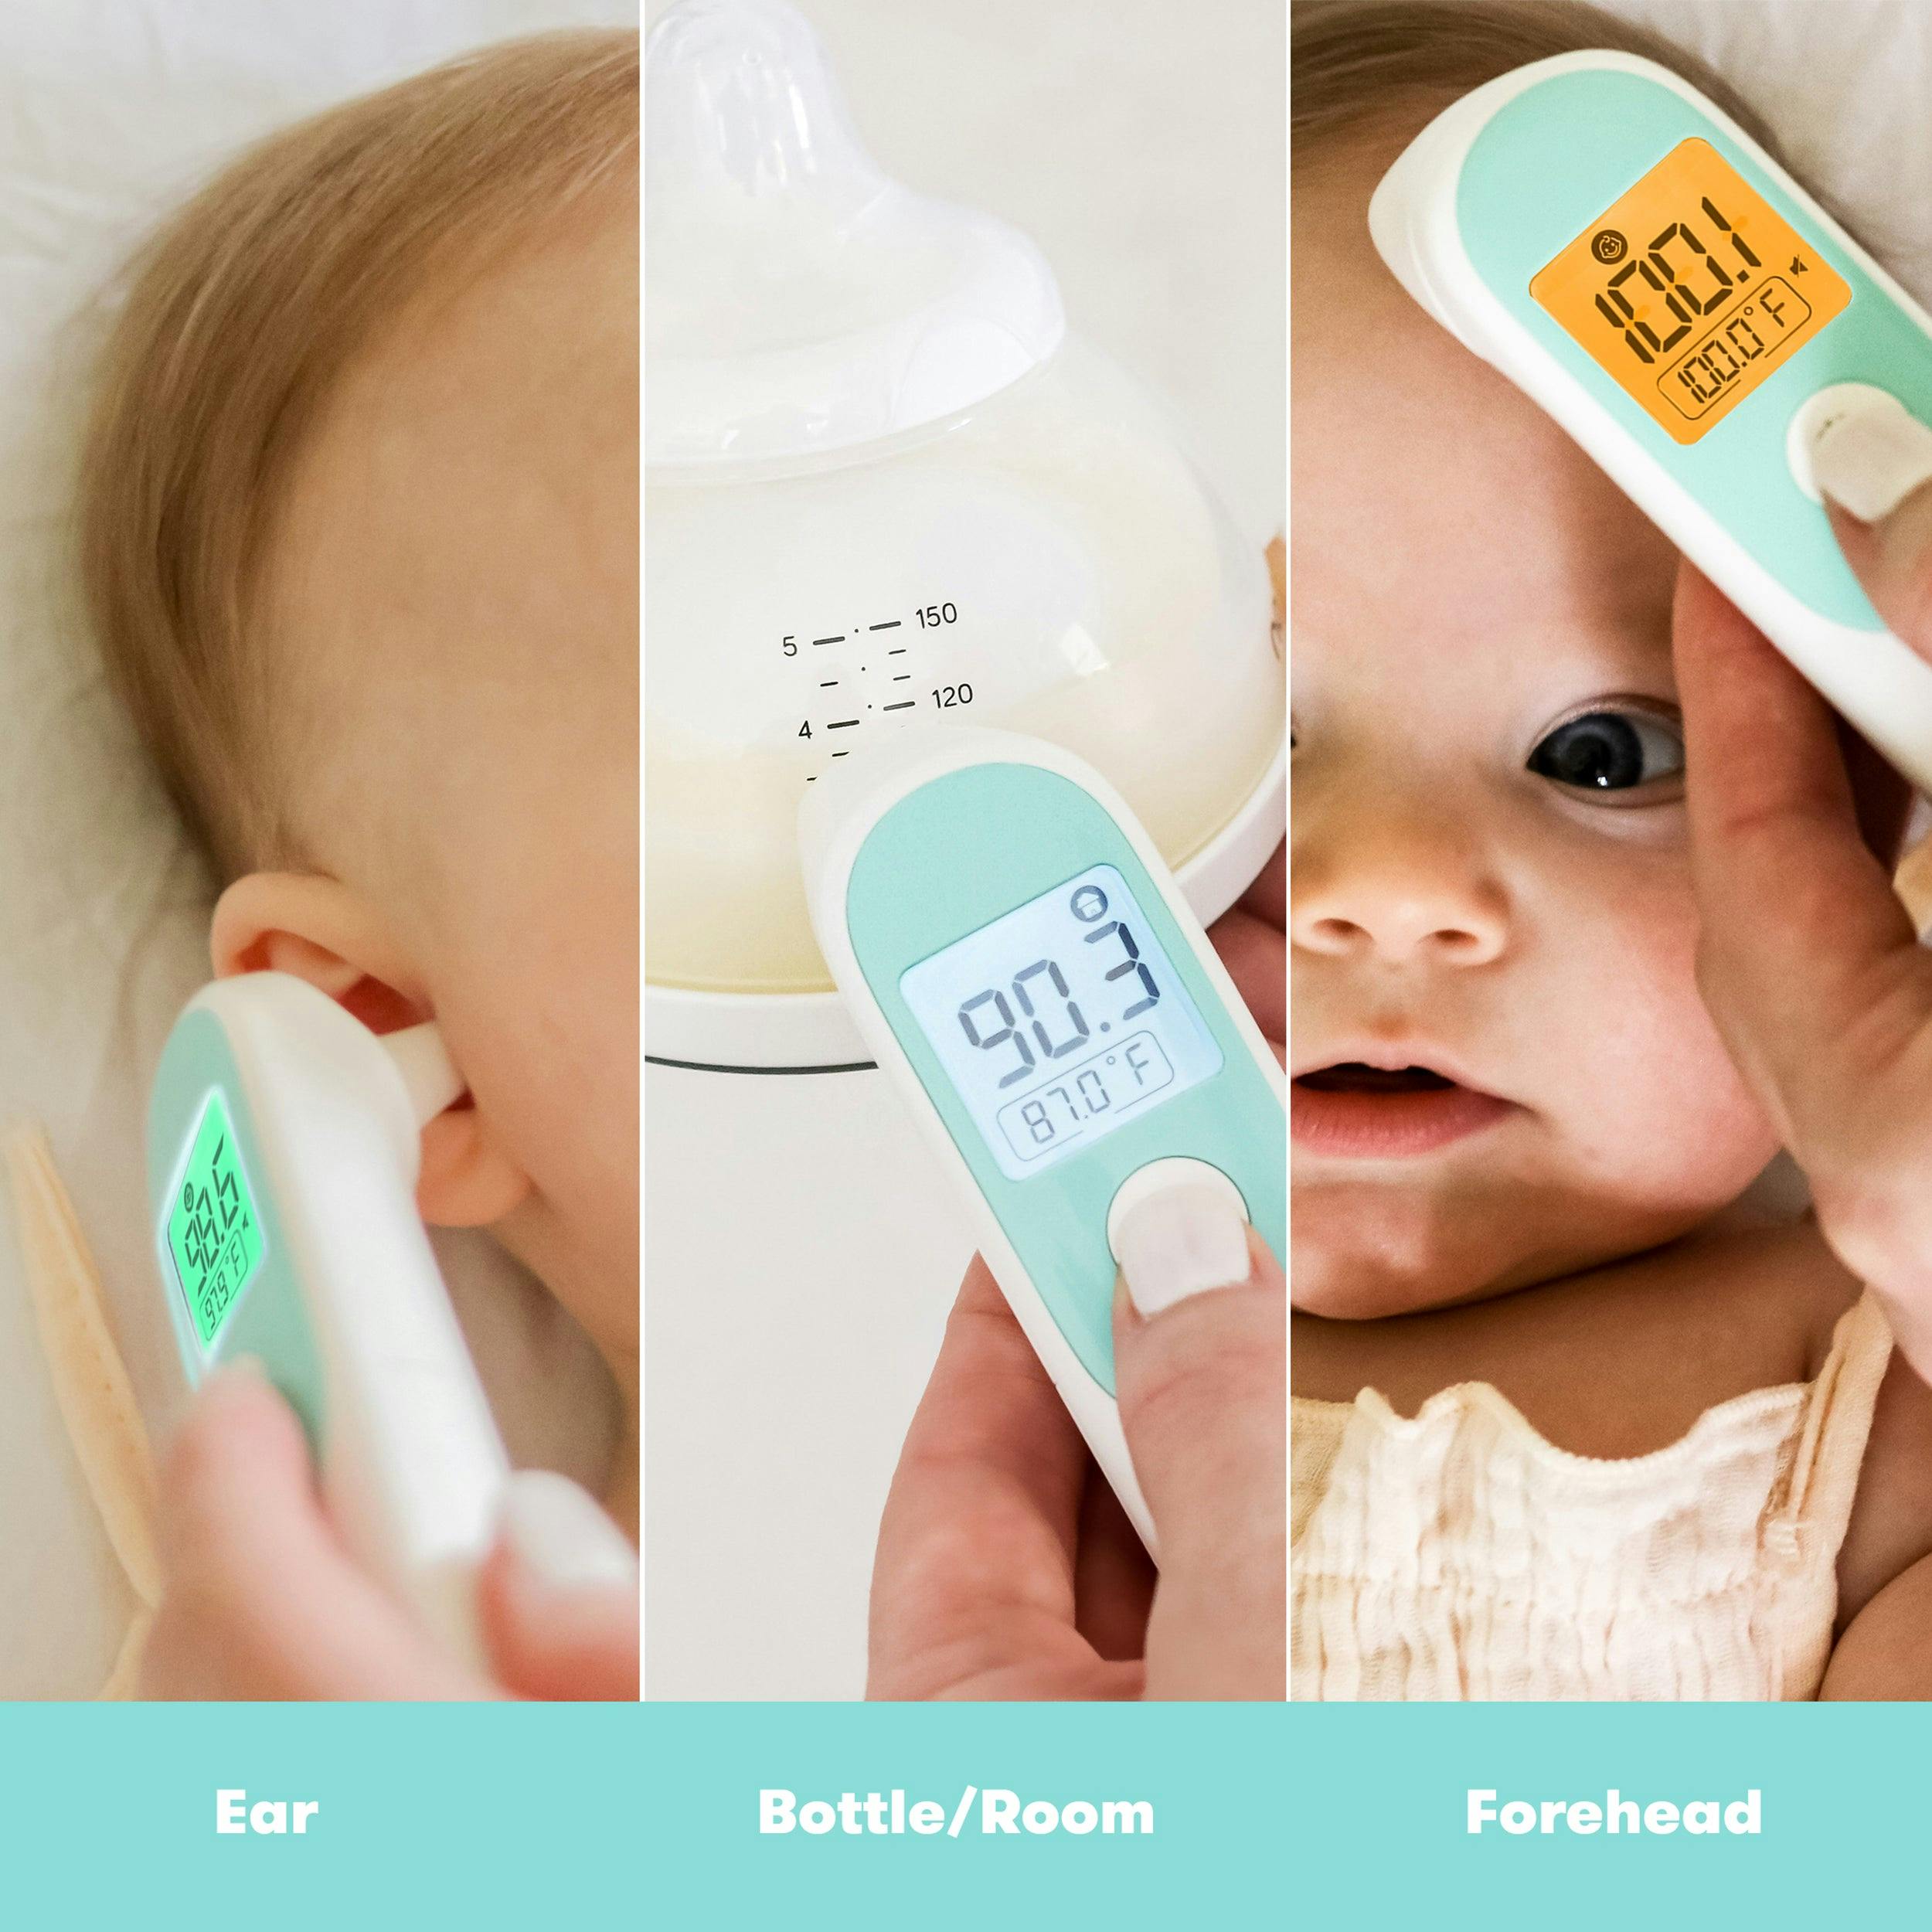 Fridababy 3-in-1 Ear, Forehead + Touchless Infrared Thermometer